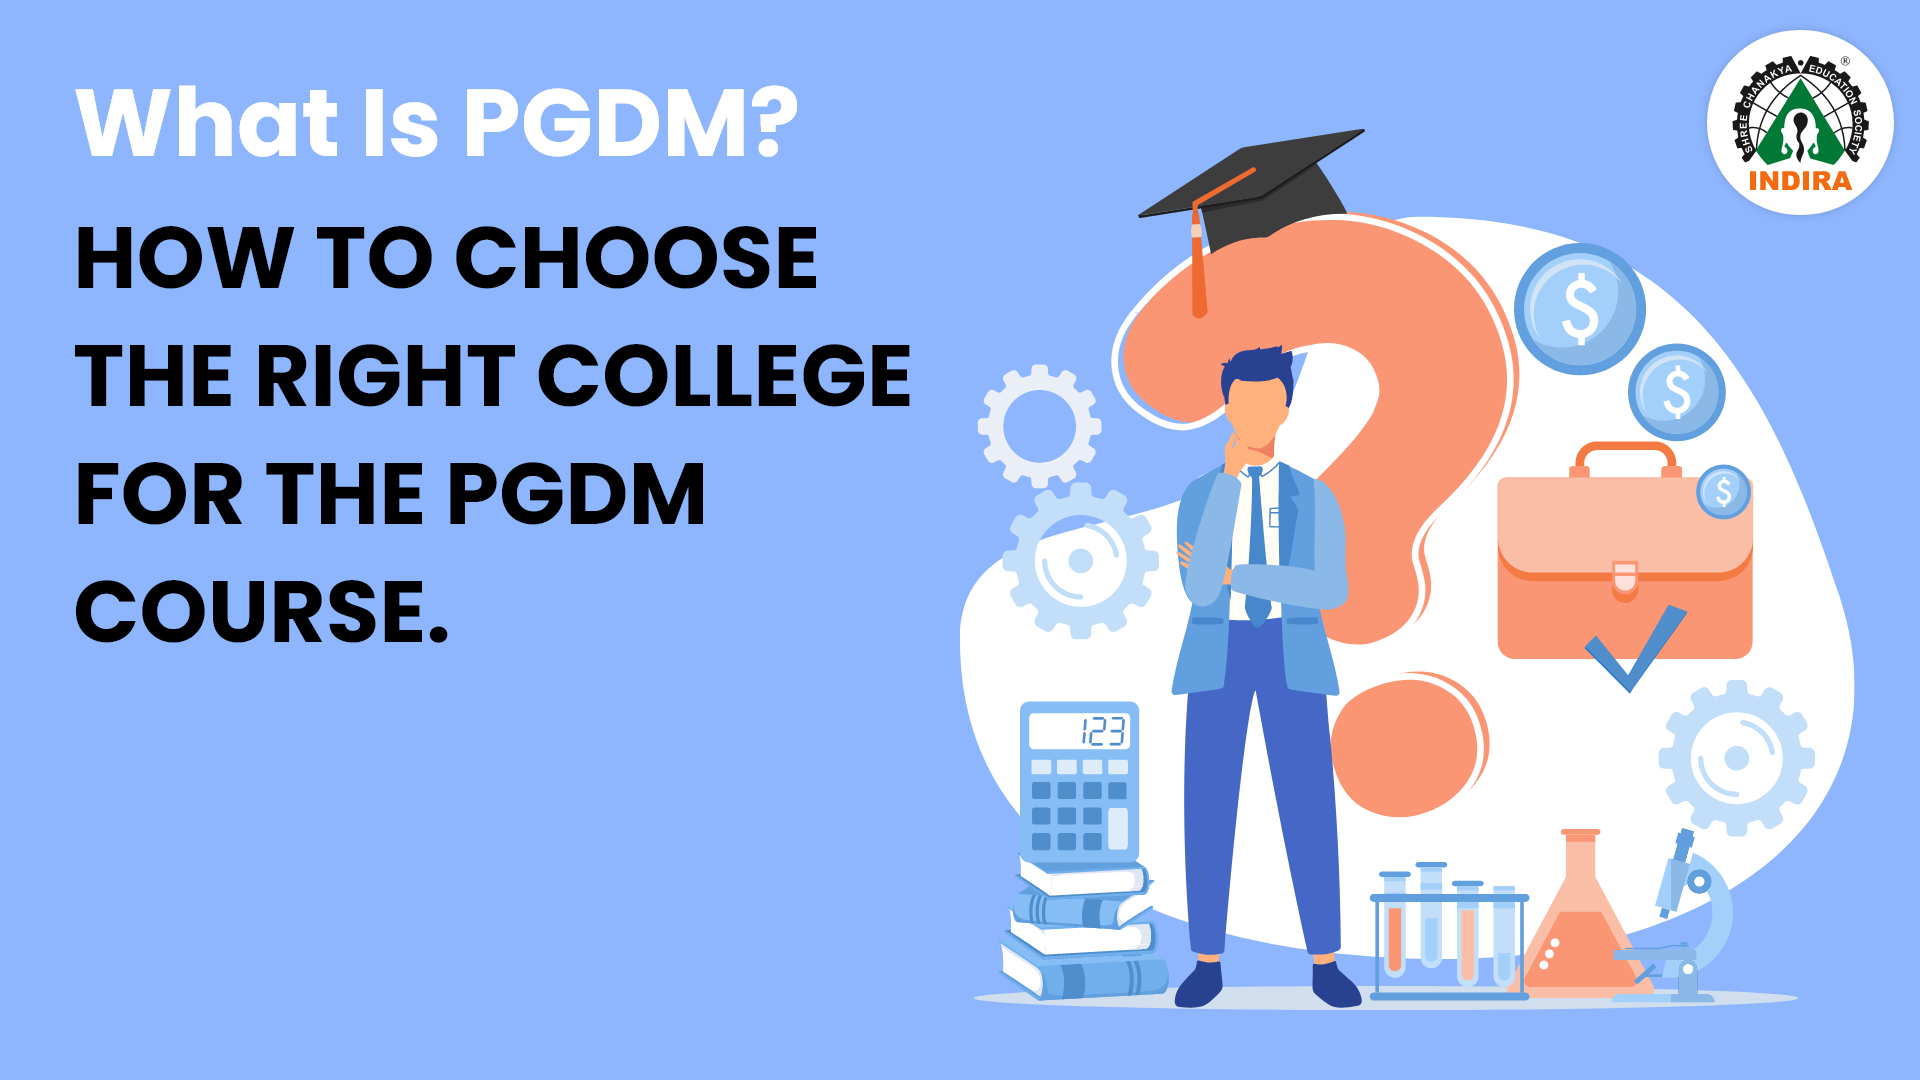 What is PGDM? How to choose the right College for the PGDM course.